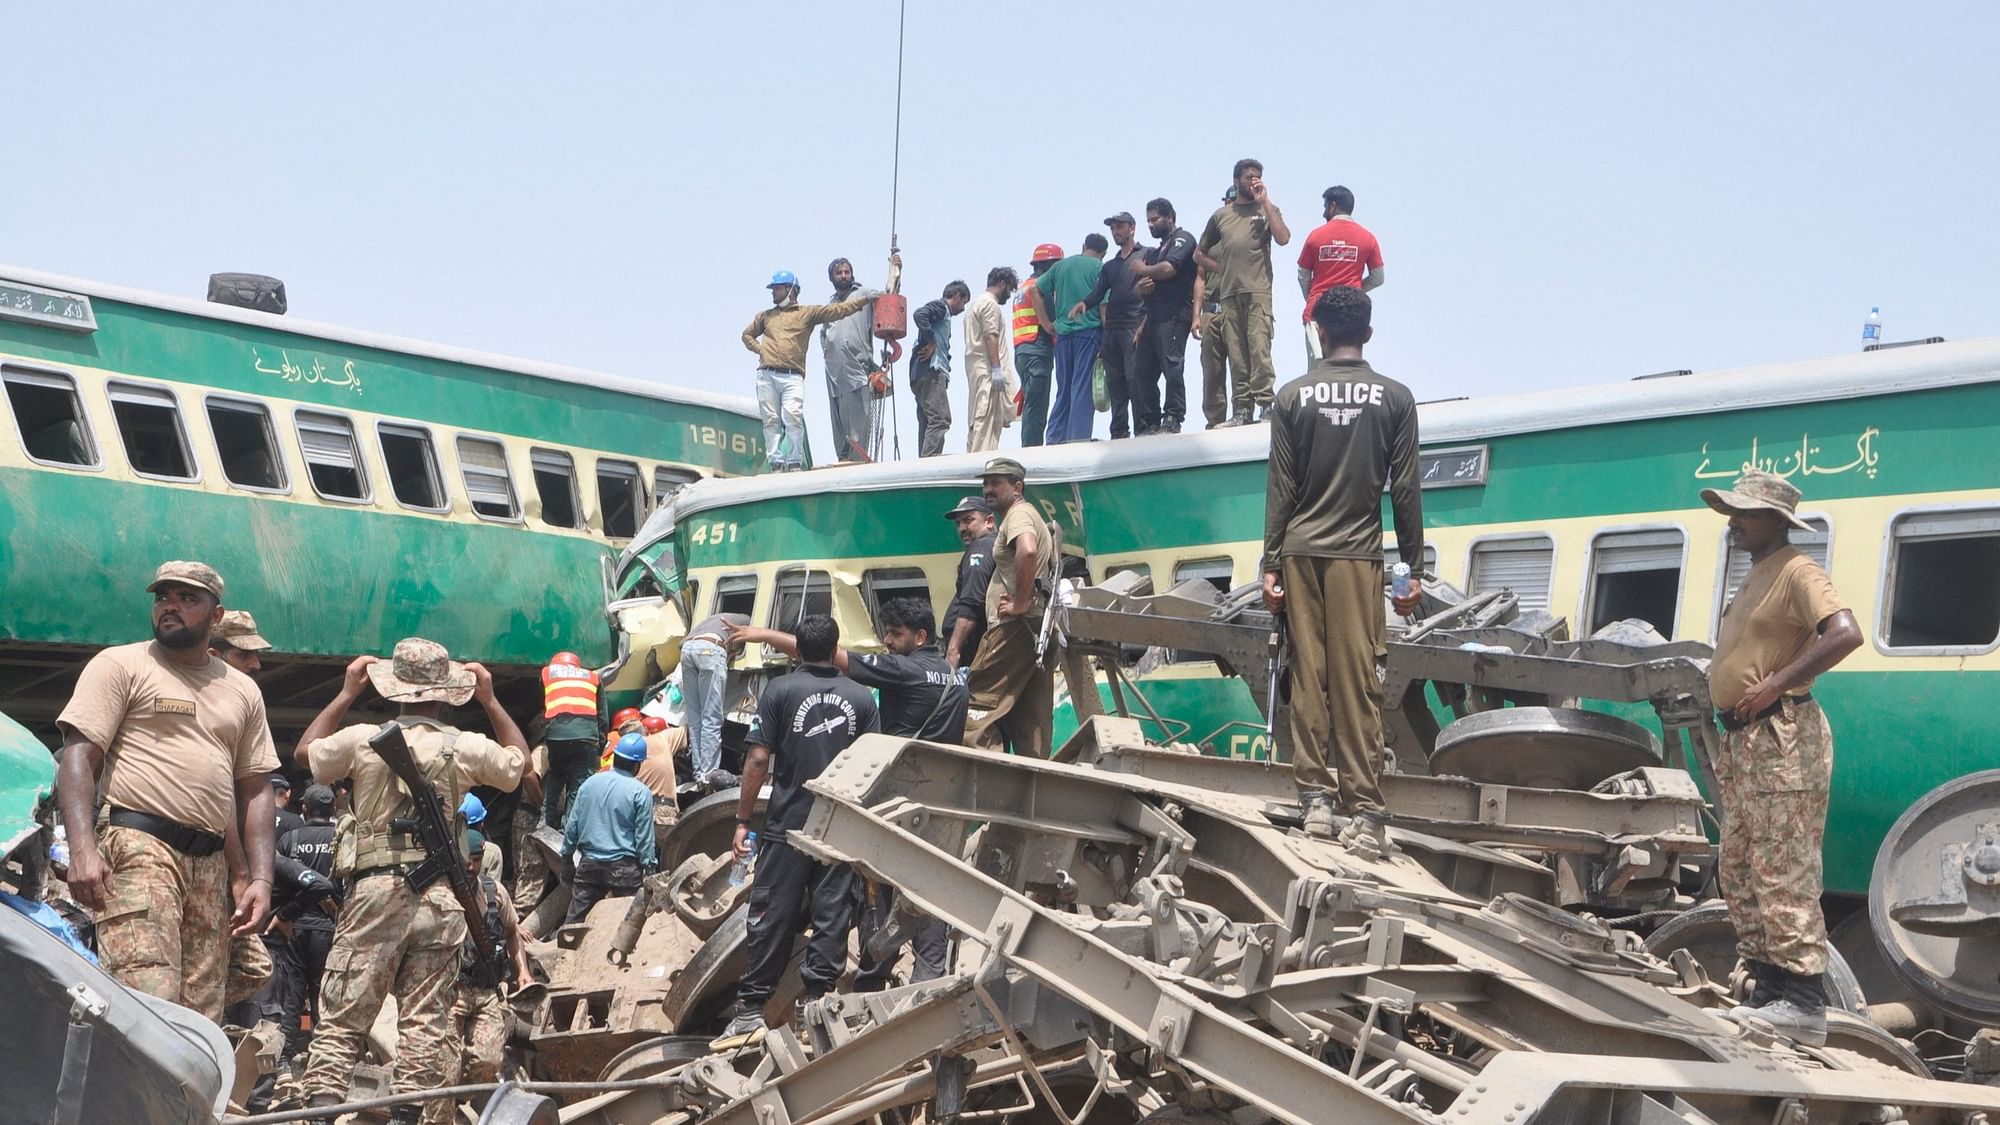 Pakistani officials and volunteers work at a train crash site in Rahim Yar Khan, Pakistan, on 11 July 2019.